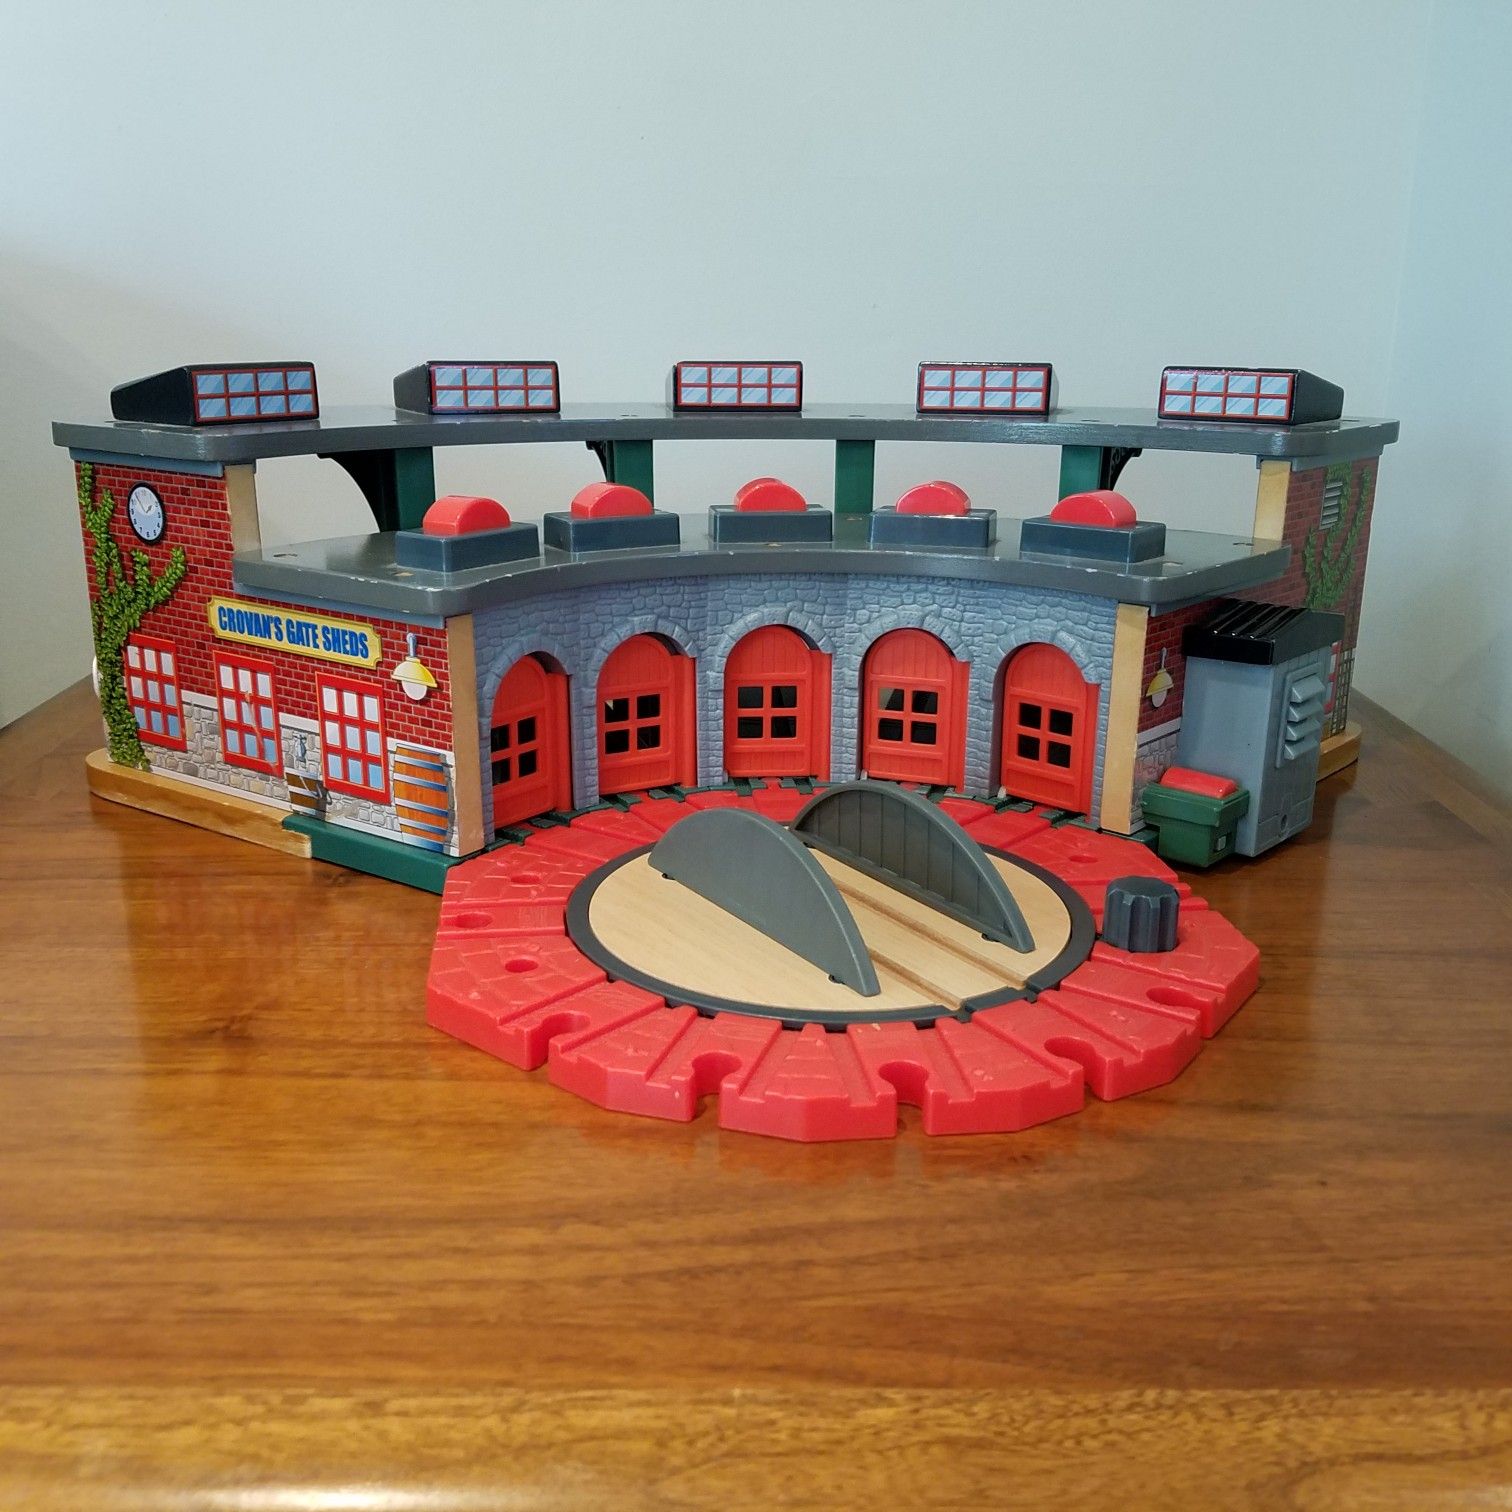 Thomas & Friends Train Crovan's Gate Sheds and Roundabout with Sounds